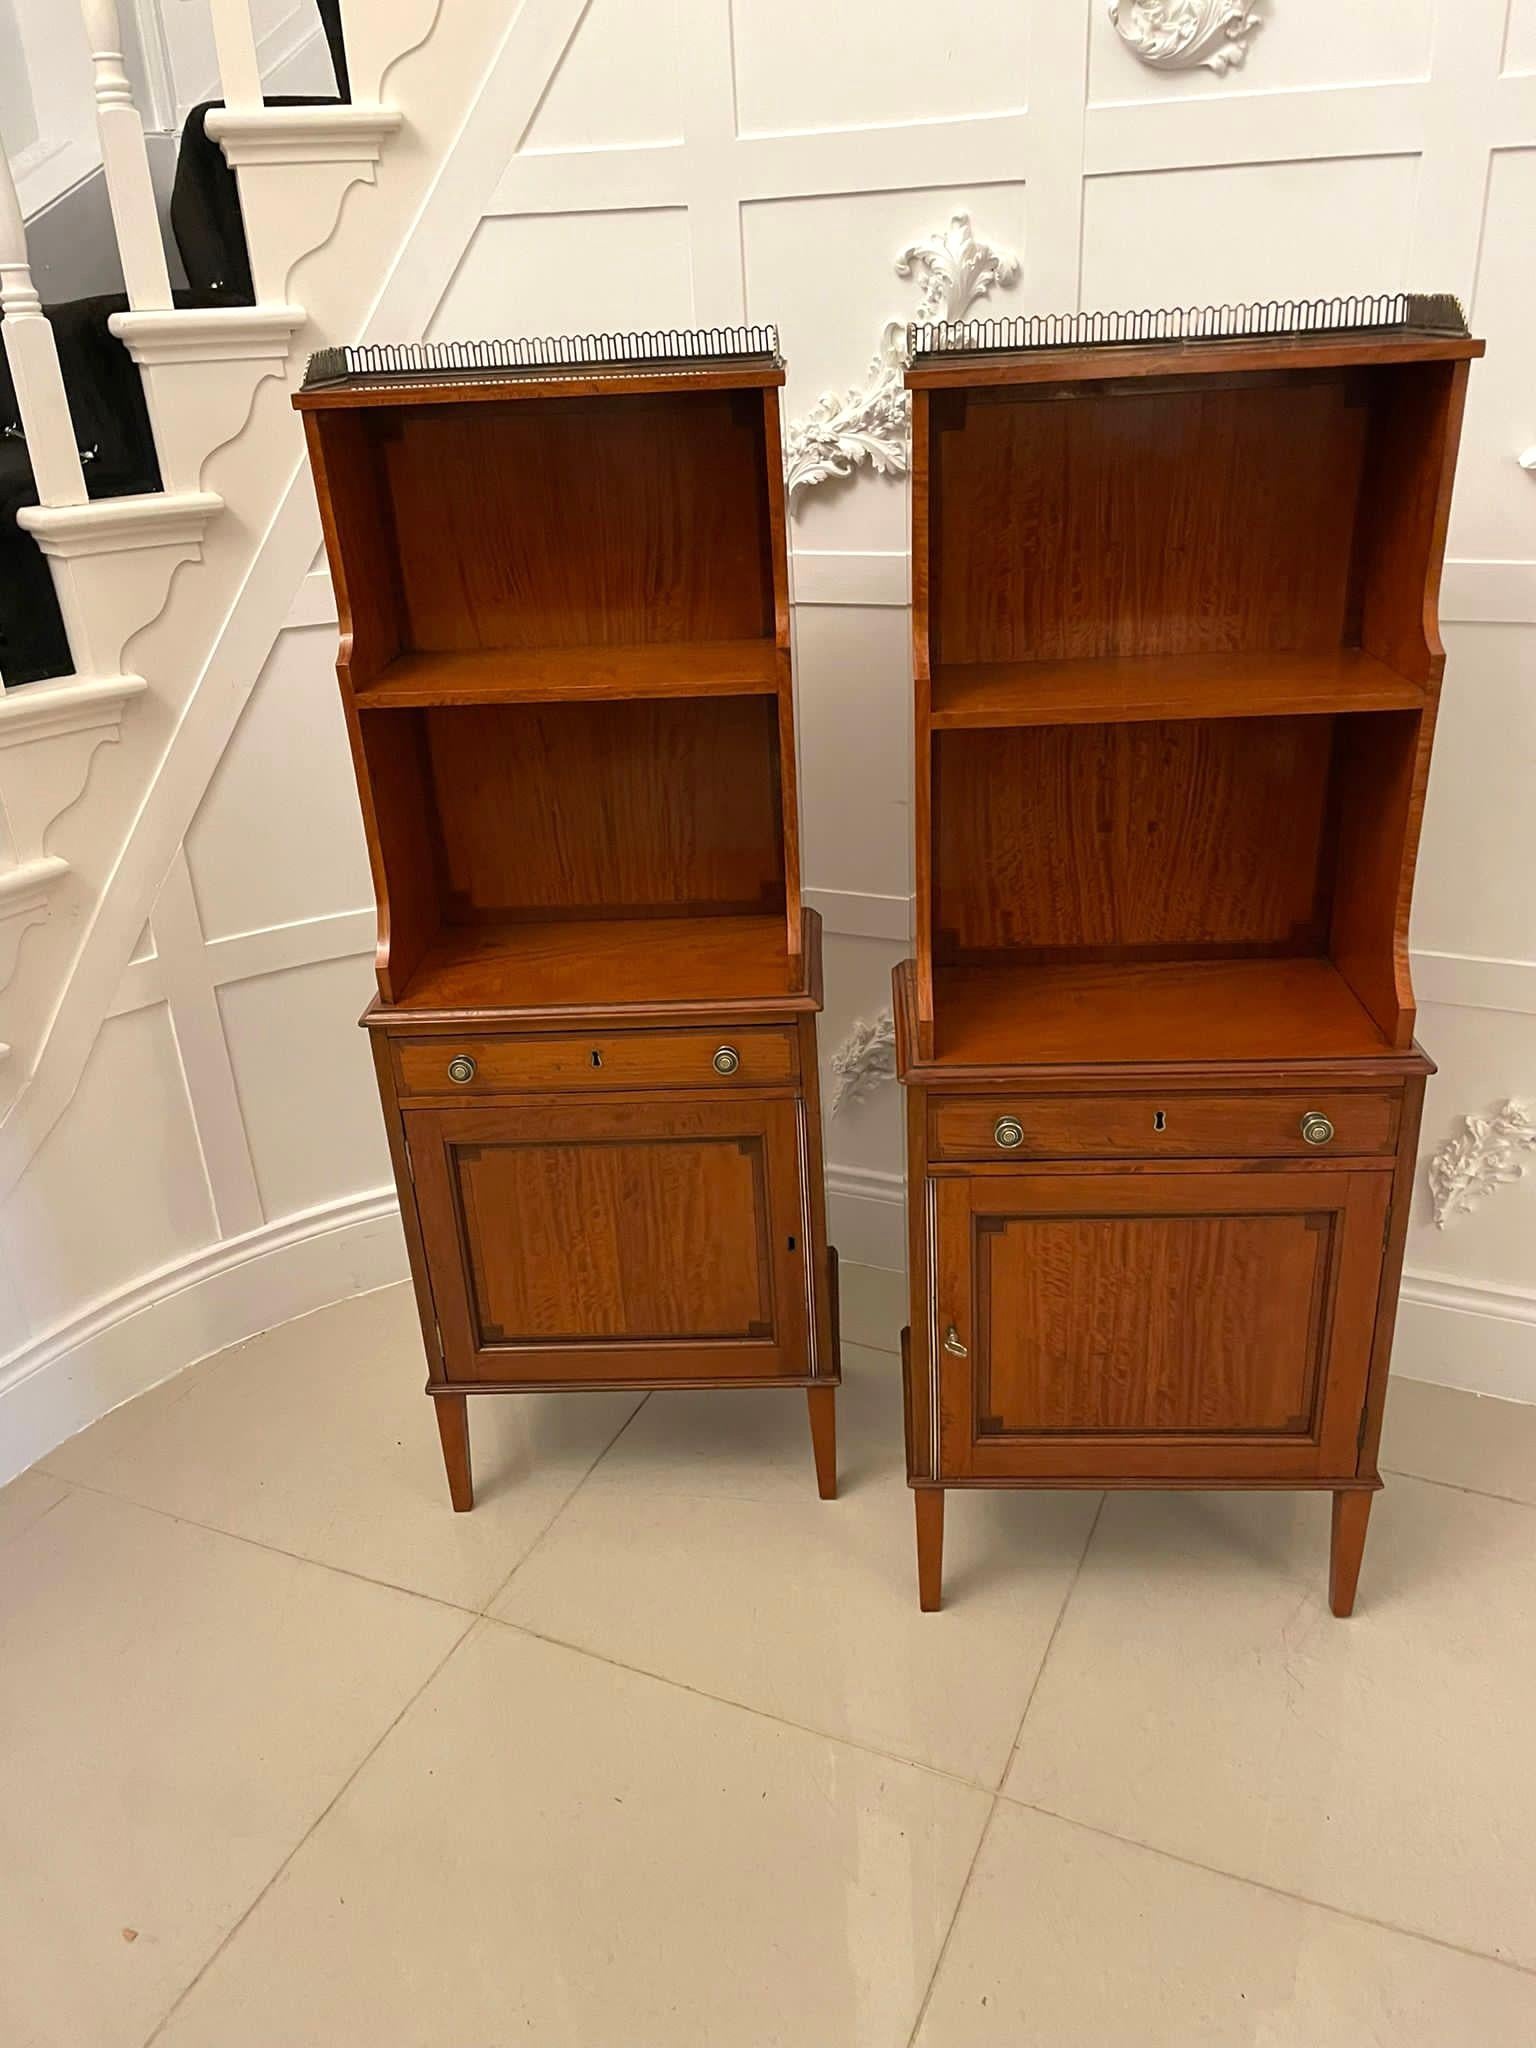 Rare pair of Gillows antique quality satinwood waterfall bookcases having the original brass gallery above a satinwood open waterfall bookcase with crossbanded satinwood backs and tops, one drawer, original brass knobs stamped Gillows above a single